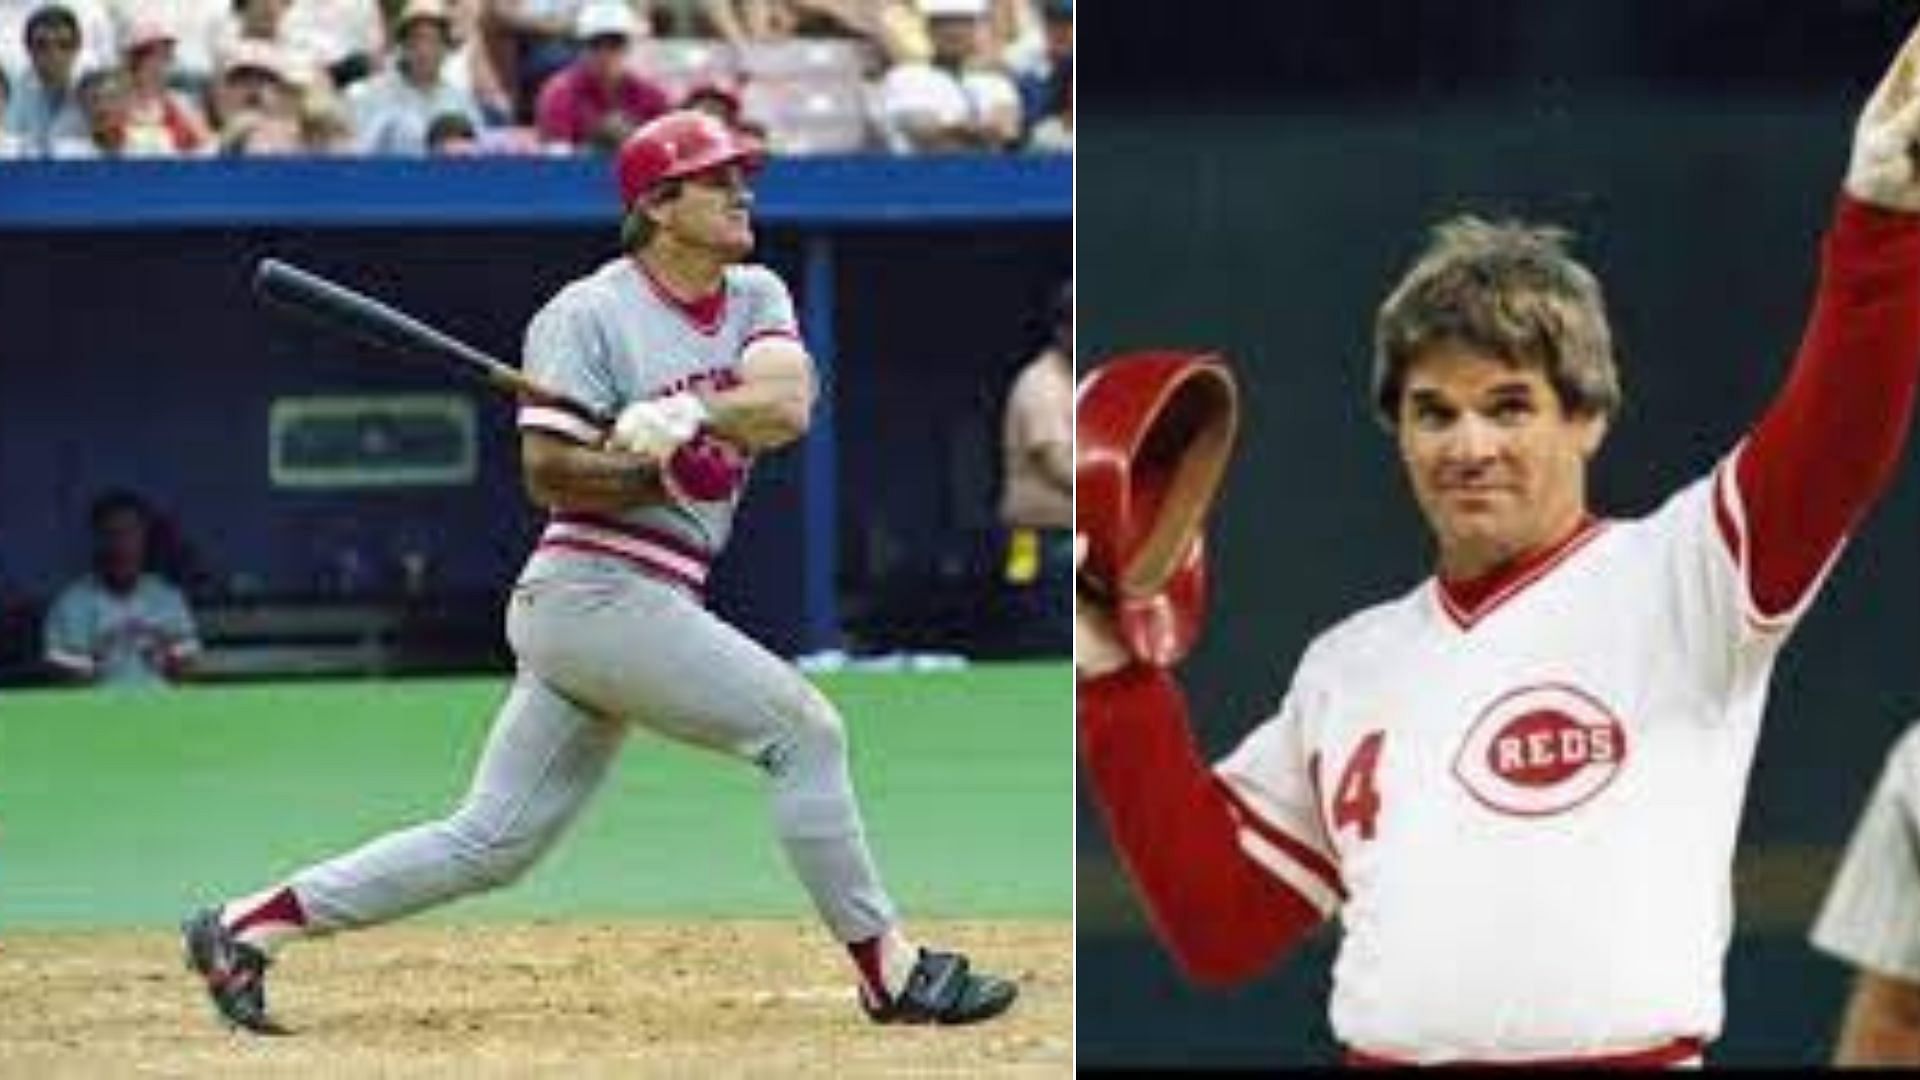 When a civil rights lawyer challenged MLB's decision petitioning Pete Rose  deserves a second chance